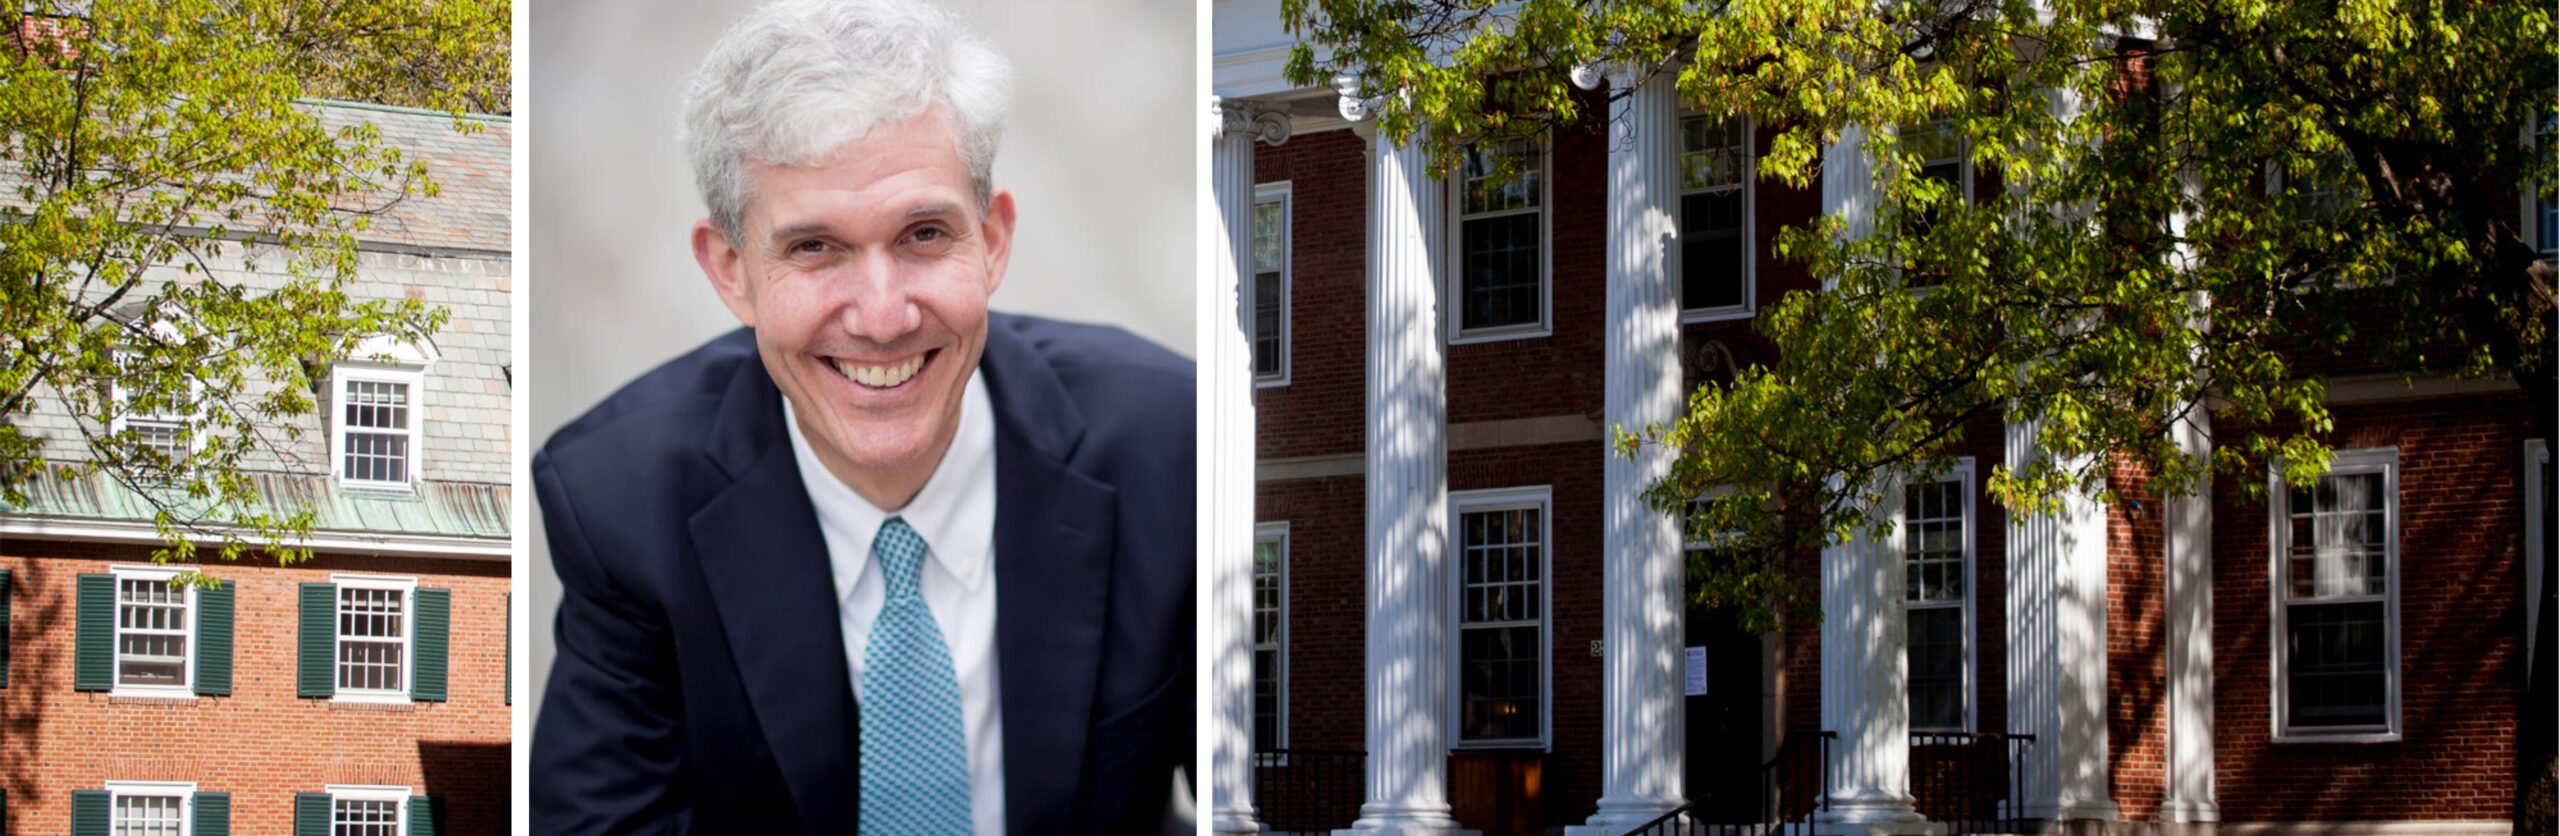 Image for Dean Matthew J. Slaughter of the Tuck School of Business at Dartmouth Earns Third Term